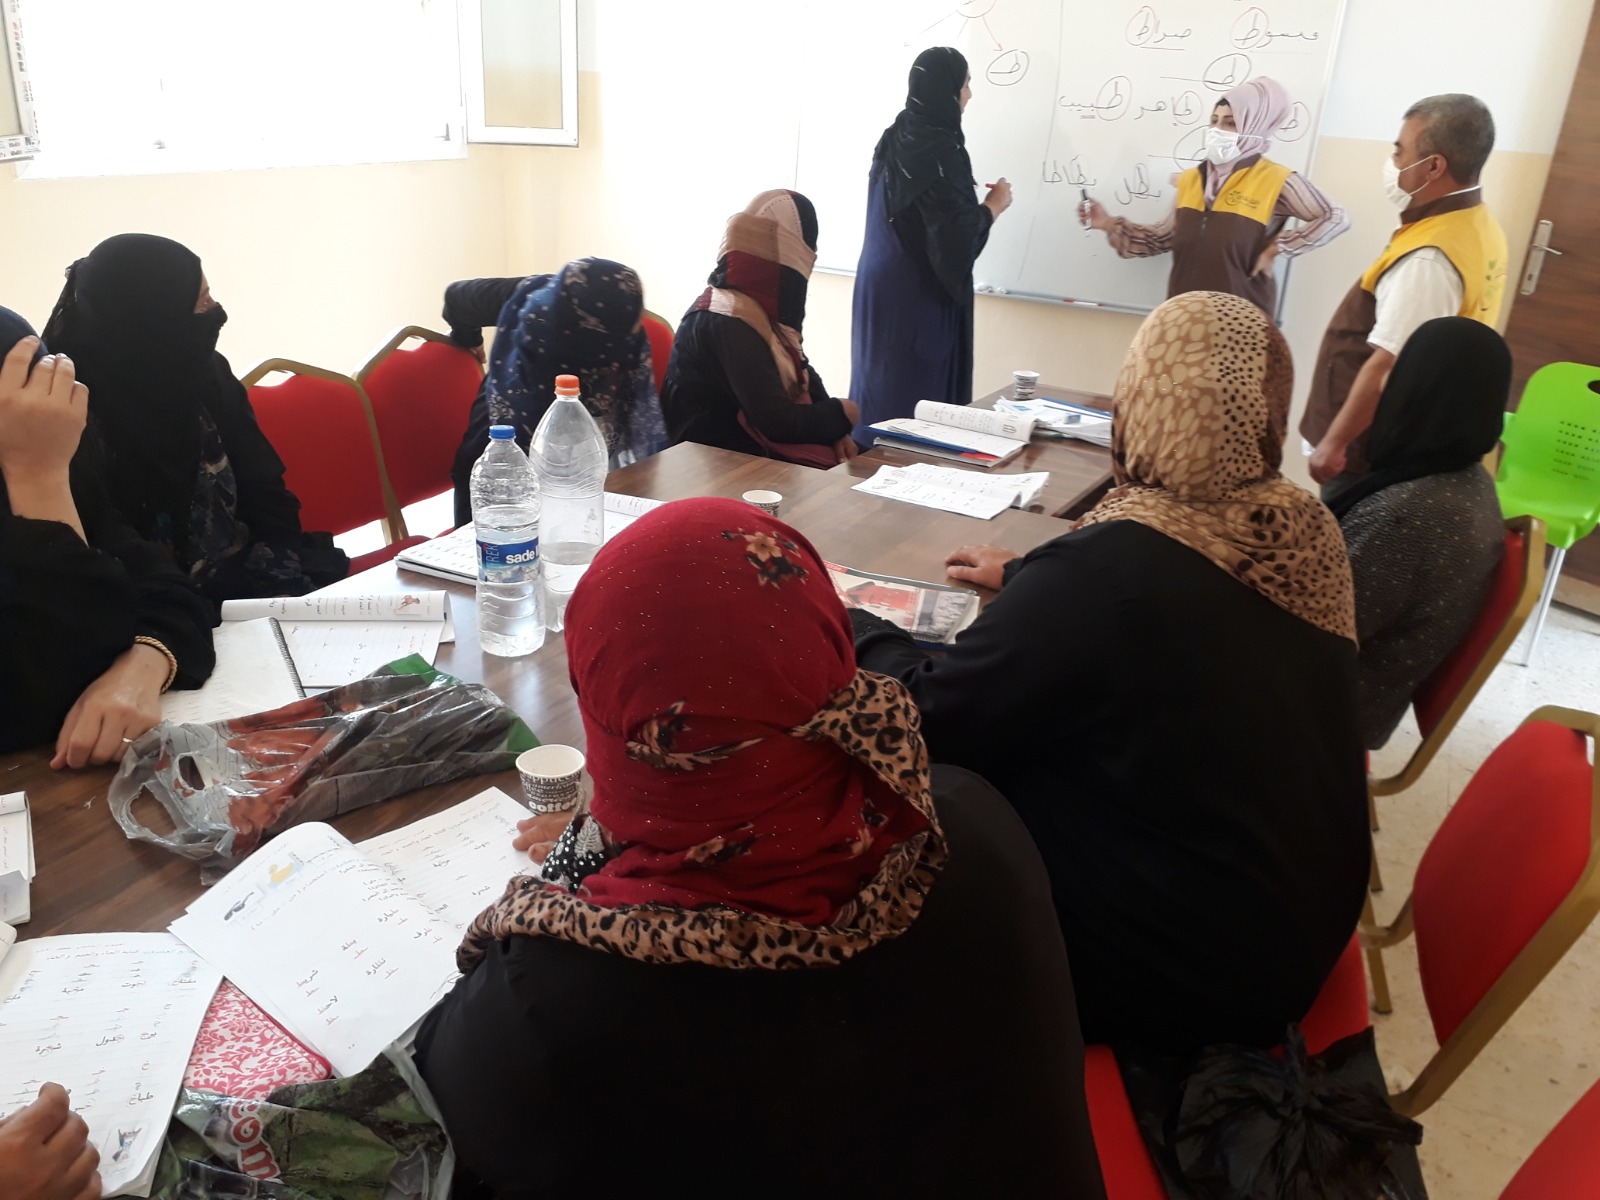 the activities that are held at the Protection Center in Tal Abyad are informal education sessions